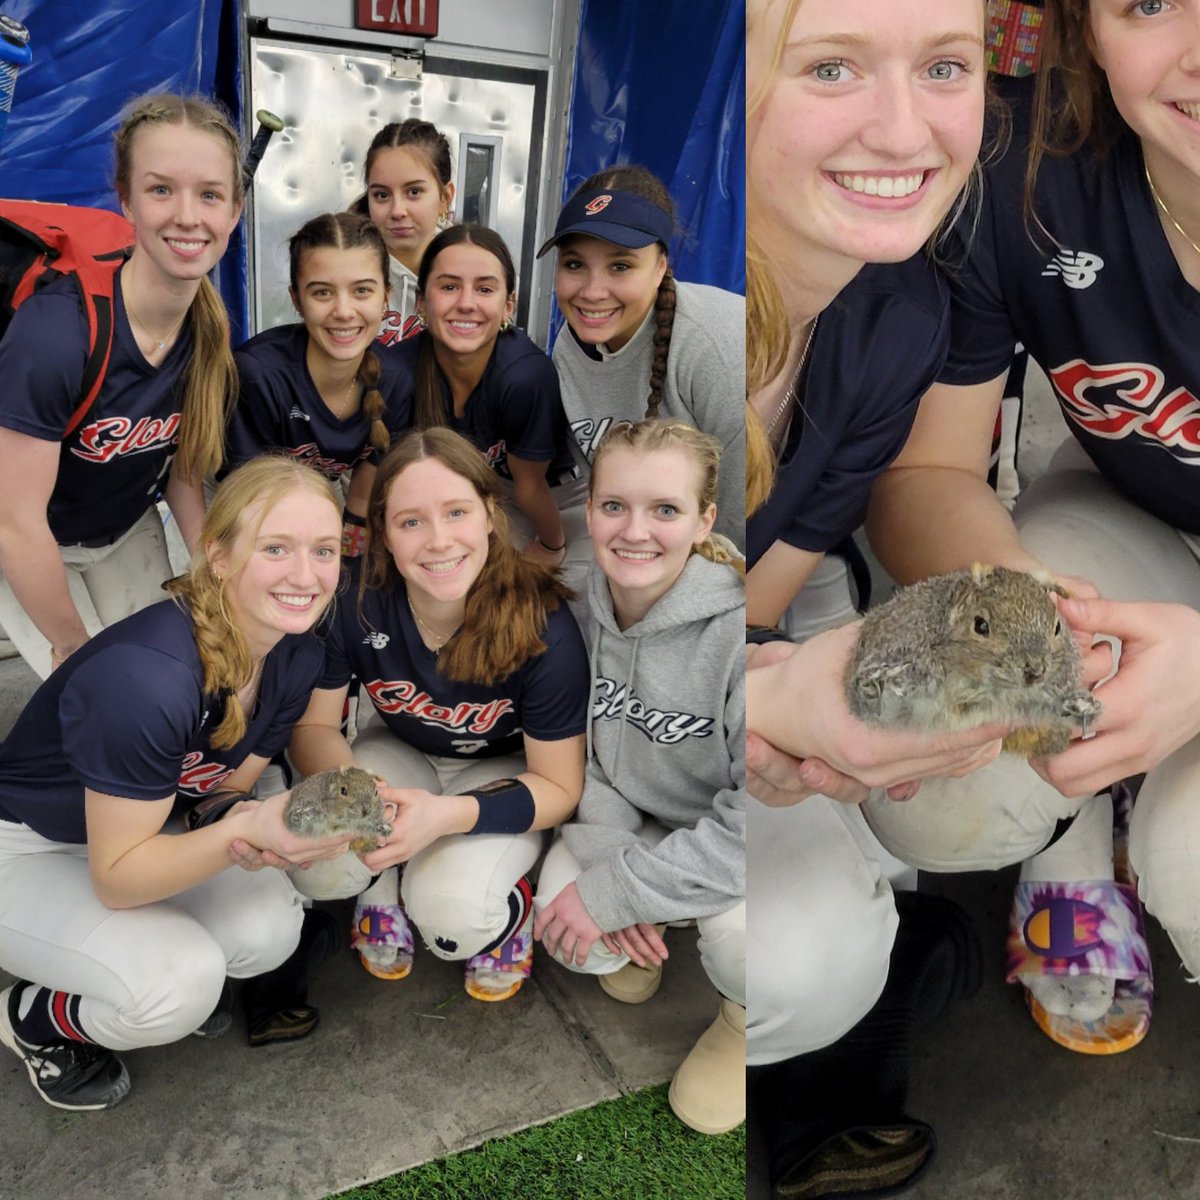 Mascot Check In. @VGGagliardi gives Gloria the squirrel credit for their good play. Let's see what other dugout mascots are out there. #DugoutGoodLuckCharms